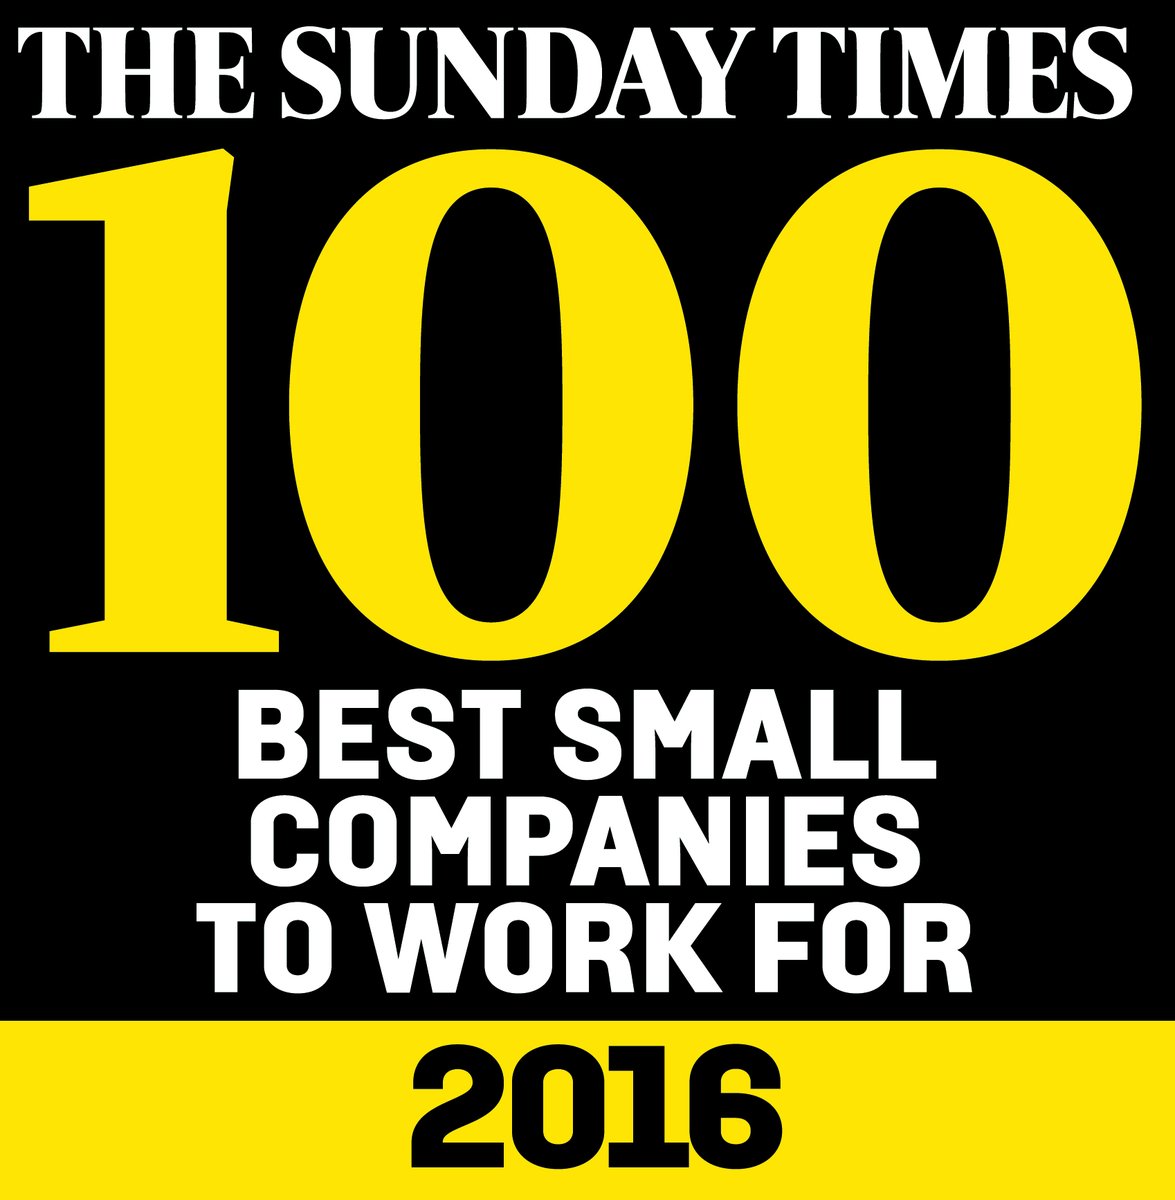 Best companies to work. Sunday times Top brands Awards.